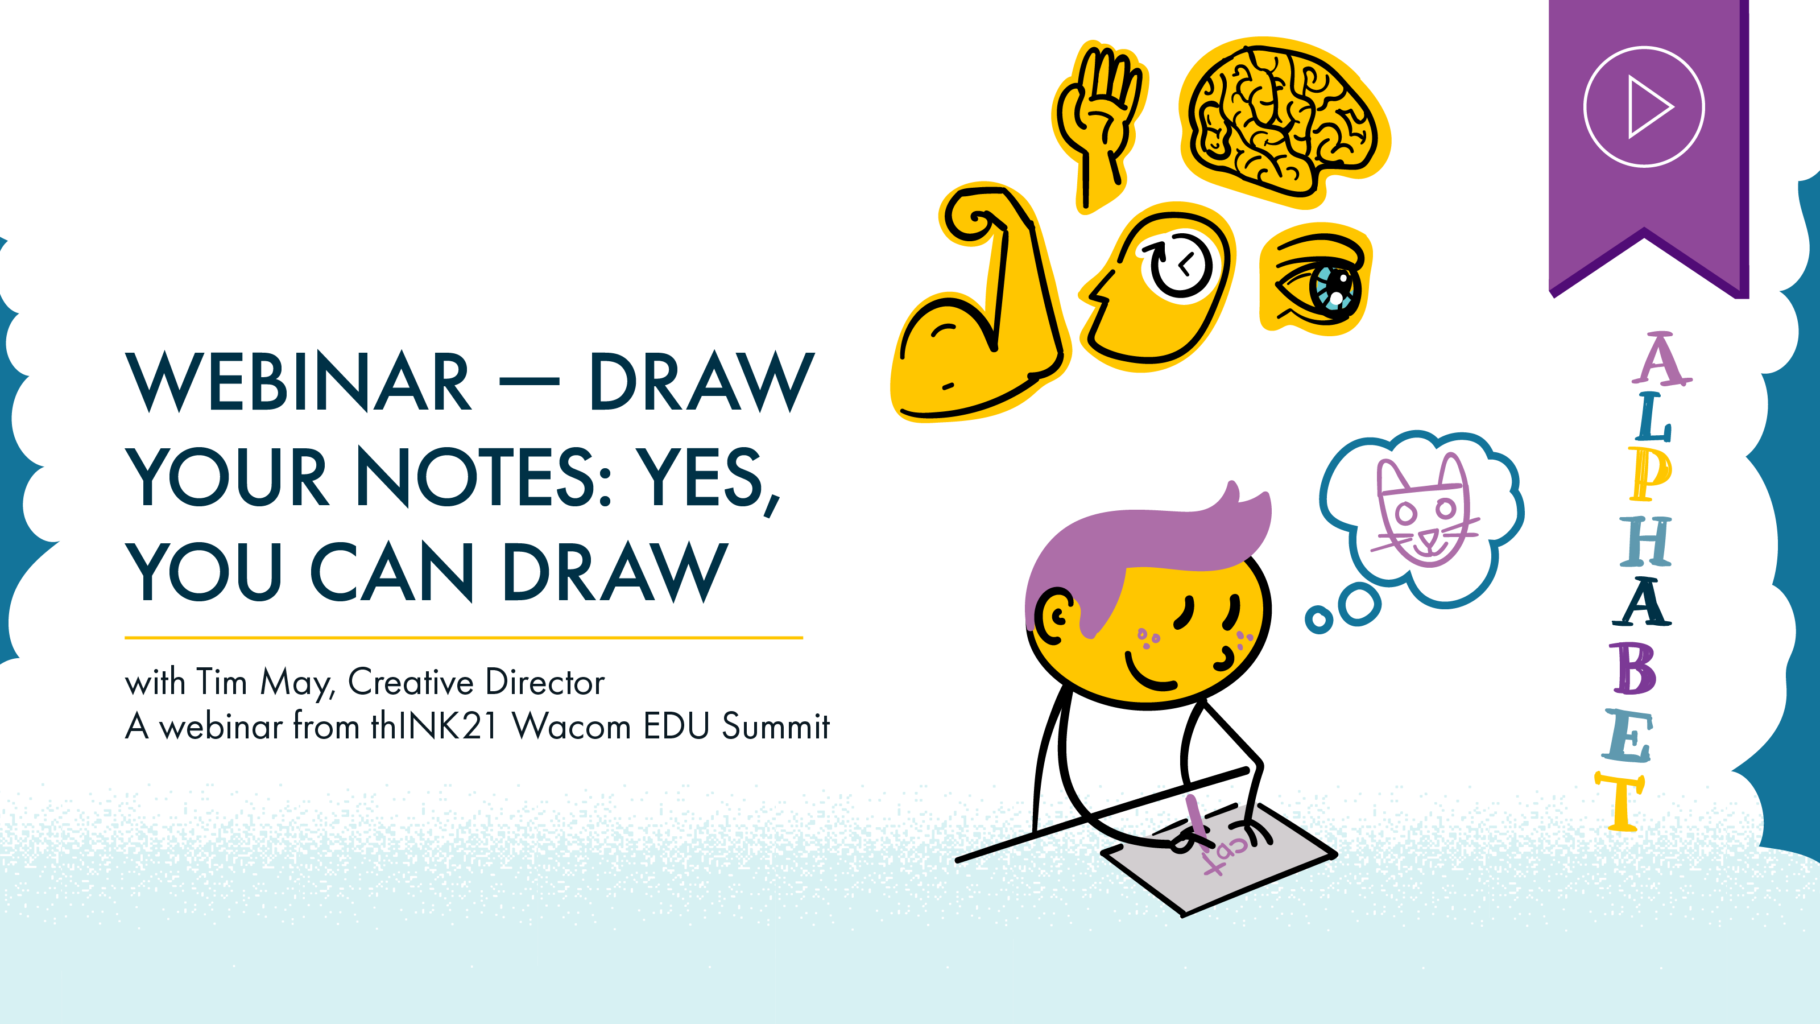 Header image of a person writing the word “cat” on a piece of paper, but thinking of an image of a cat. Above are five icons representing the senses, and to the right is the word “ALPHABET”. Text to the left under the XPLANE wordmark reads “Draw Your Notes: Yes, You Can Draw, with Tim May, Creative Director. A webinar from thINK21 Wacom EDU Summit”. Above is a purple tag with a white play button icon denoting that this webinar has a recording available.